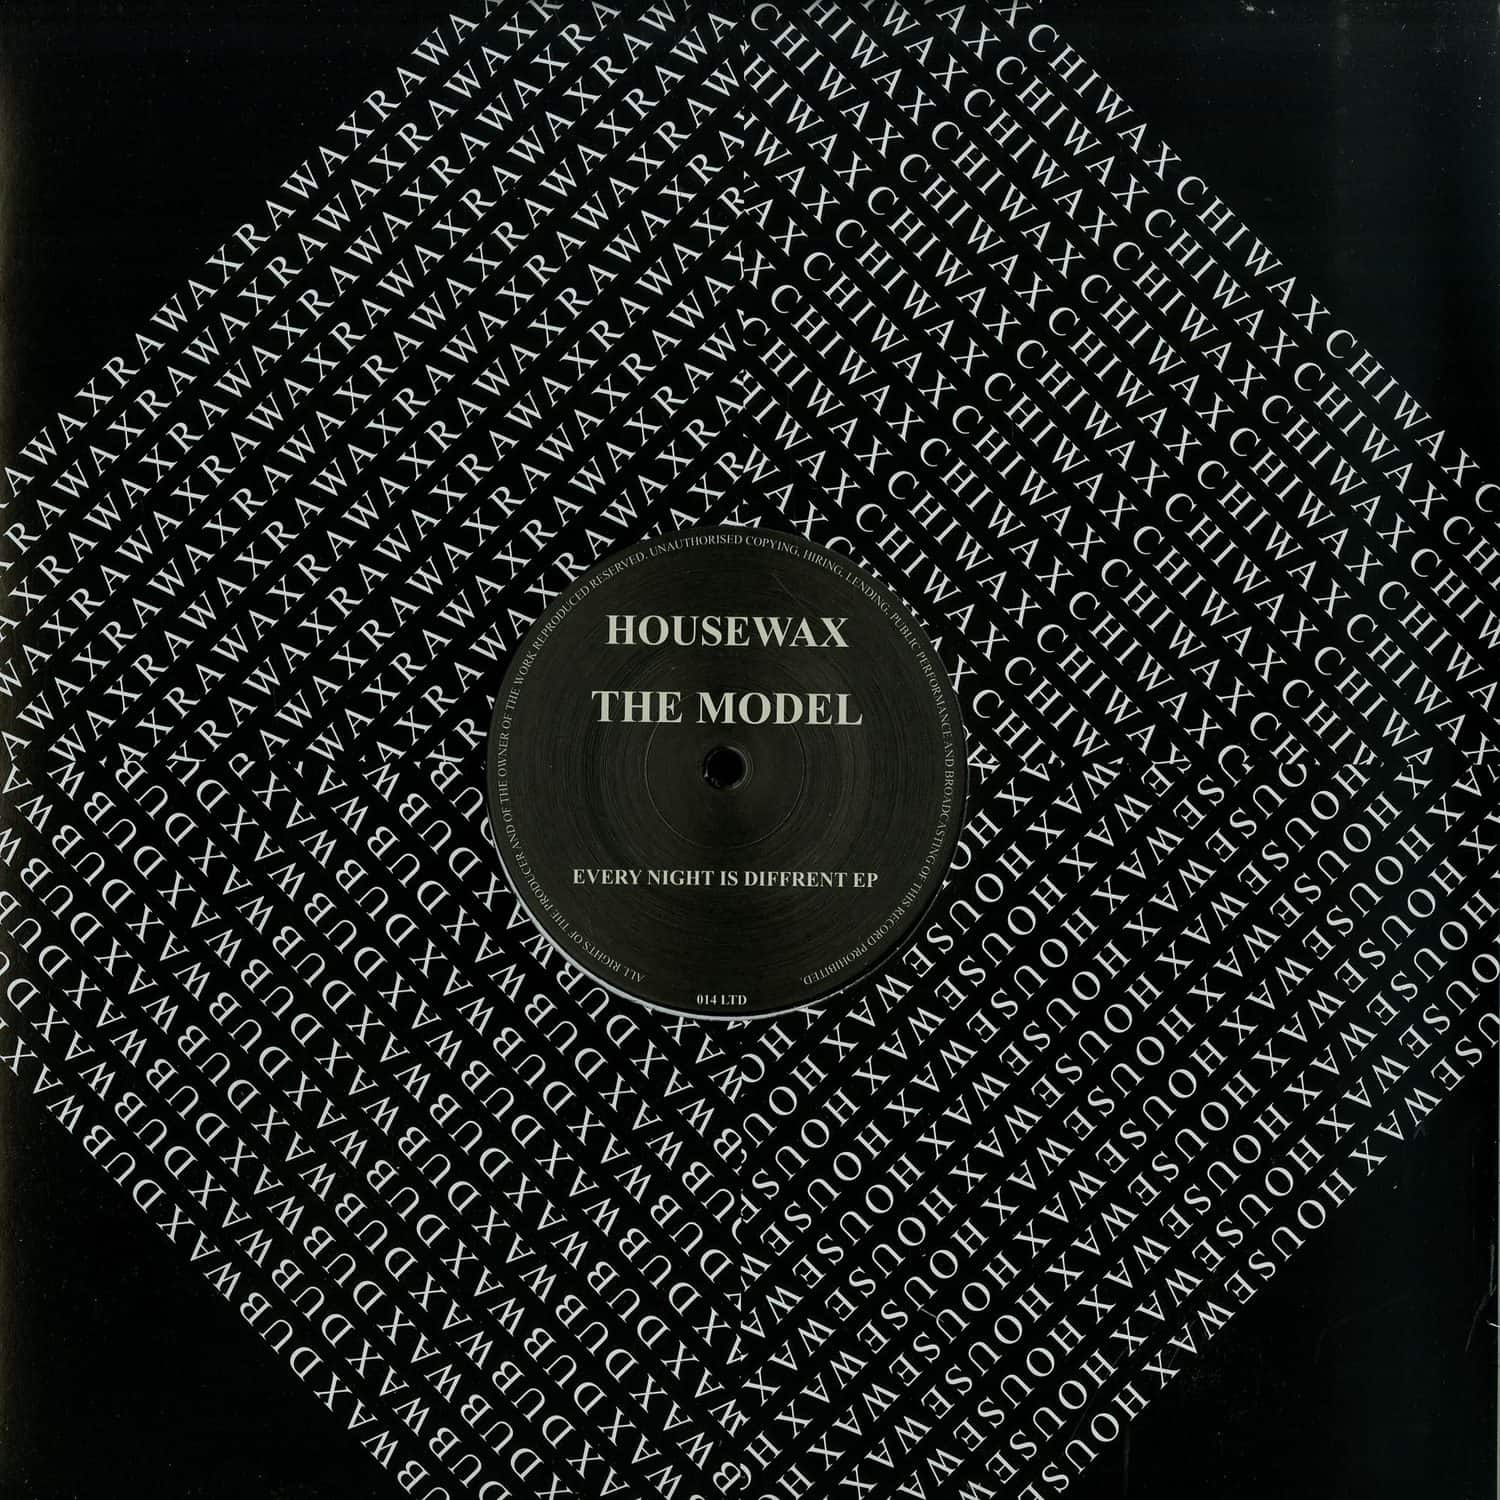 The Model - EVERY NIGHT IS DIFFERENT EP